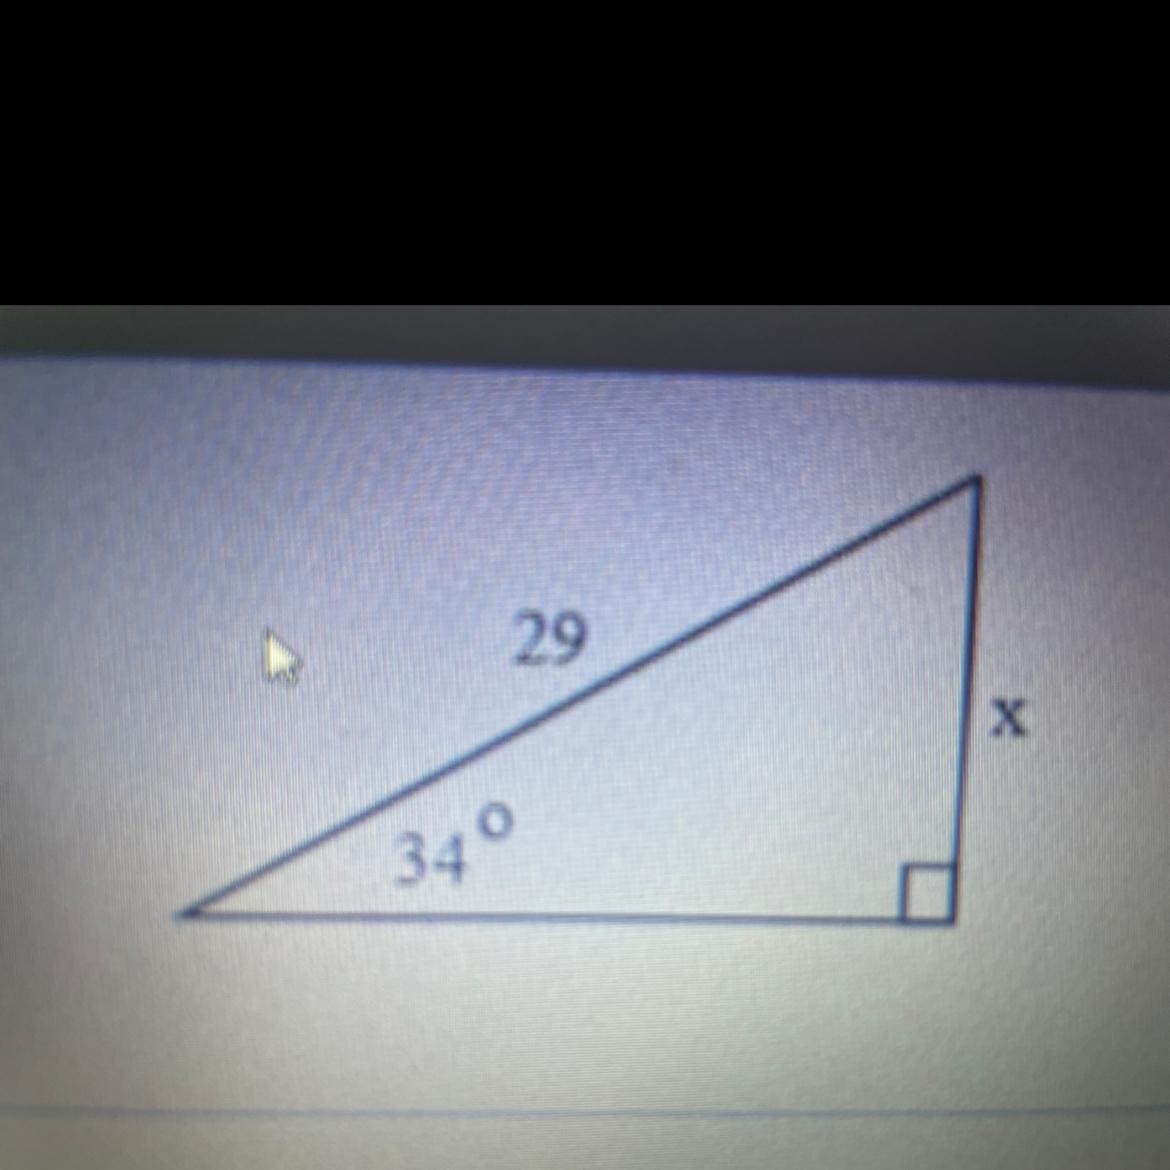 Find Value Of X. Math 80 I Know Its Something To Do With Sine Right?